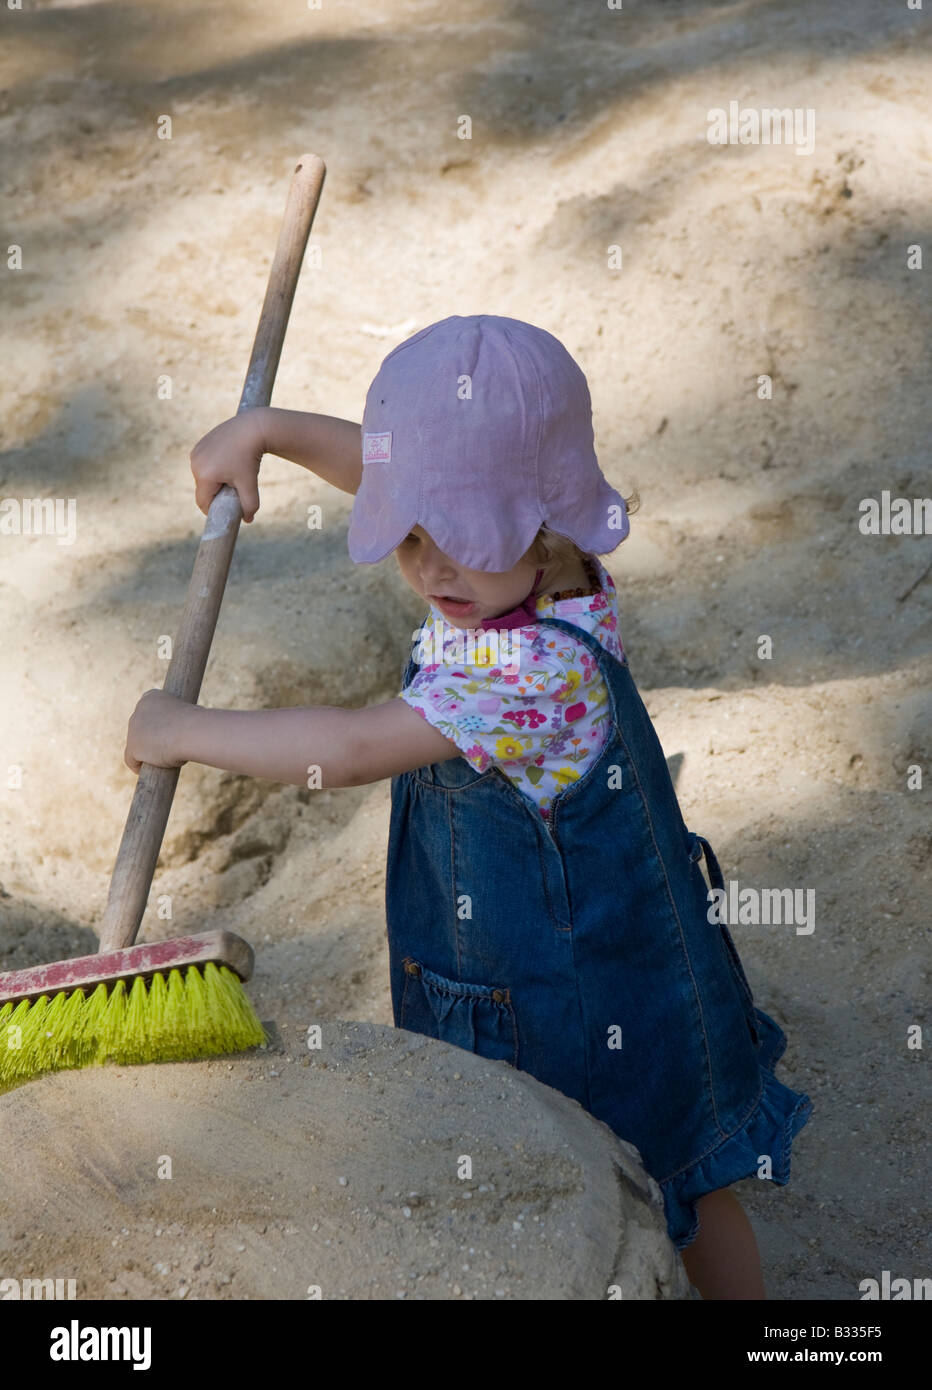 Little girl Playing with broom Banque D'Images